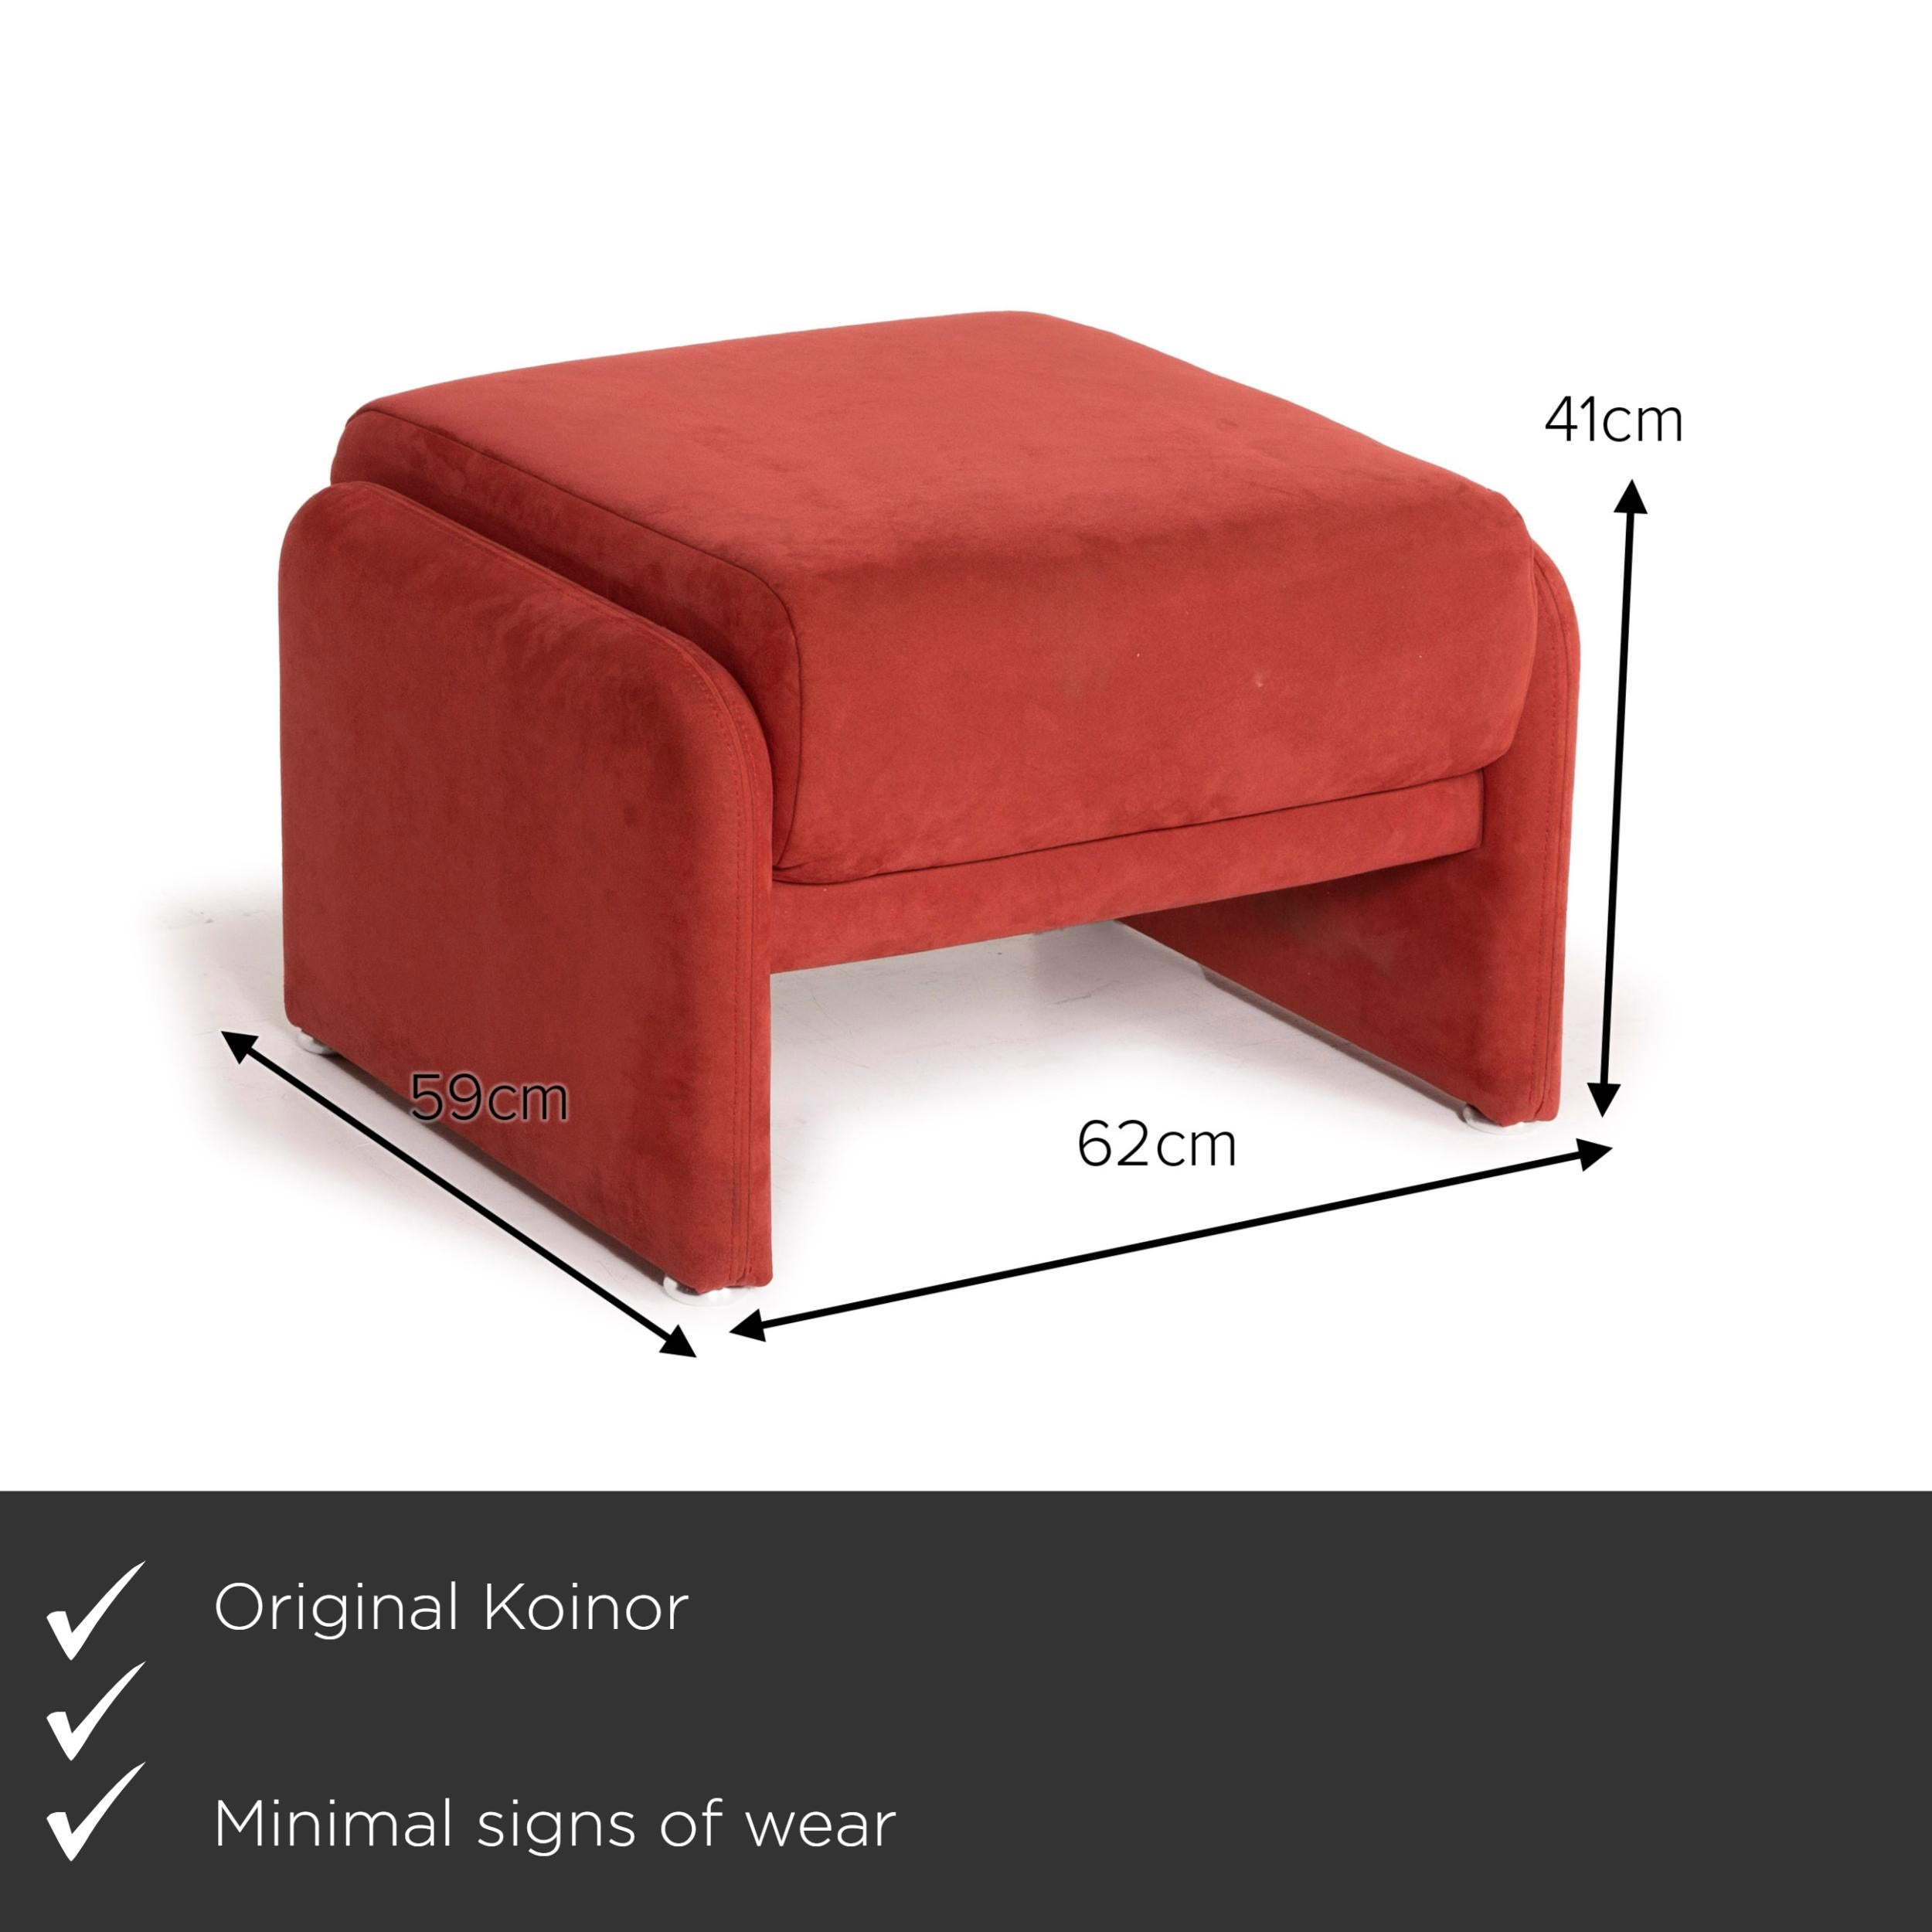 We present to you a Koinor fabric stool orange.
 

 Product measurements in centimeters:
 

Depth: 59
 Width: 62
 Height: 41.





 